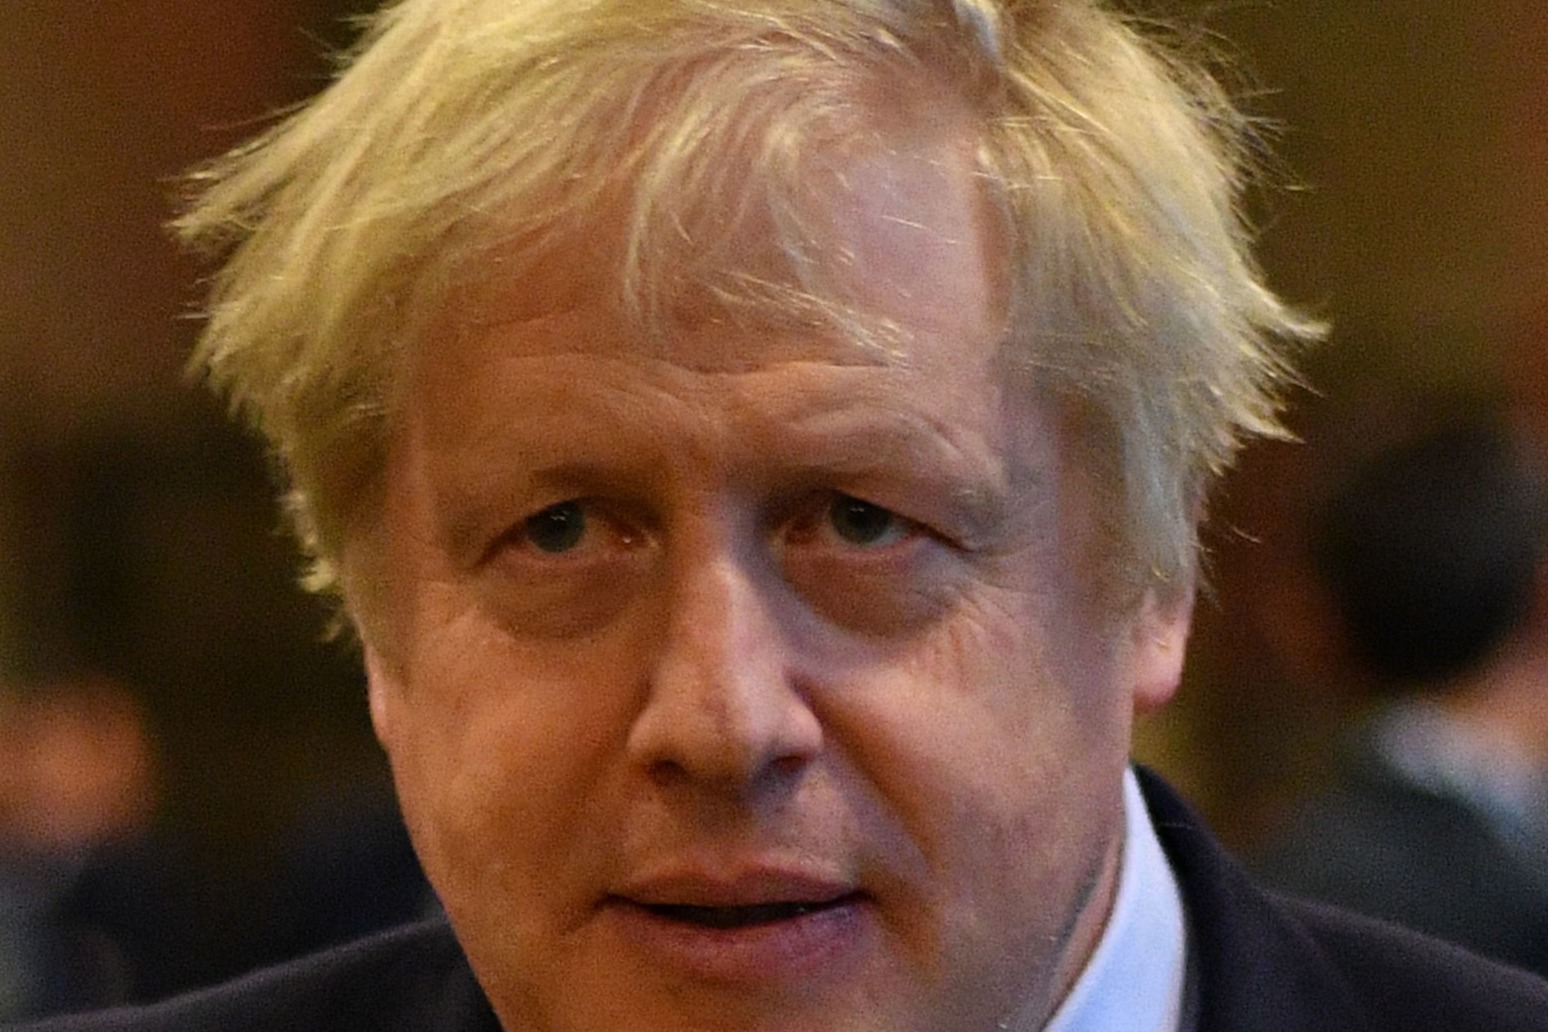 JOHNSON TO CHAIR NATIONAL SECURITY COUNCIL AMID DEEPENING GULF CRISIS 